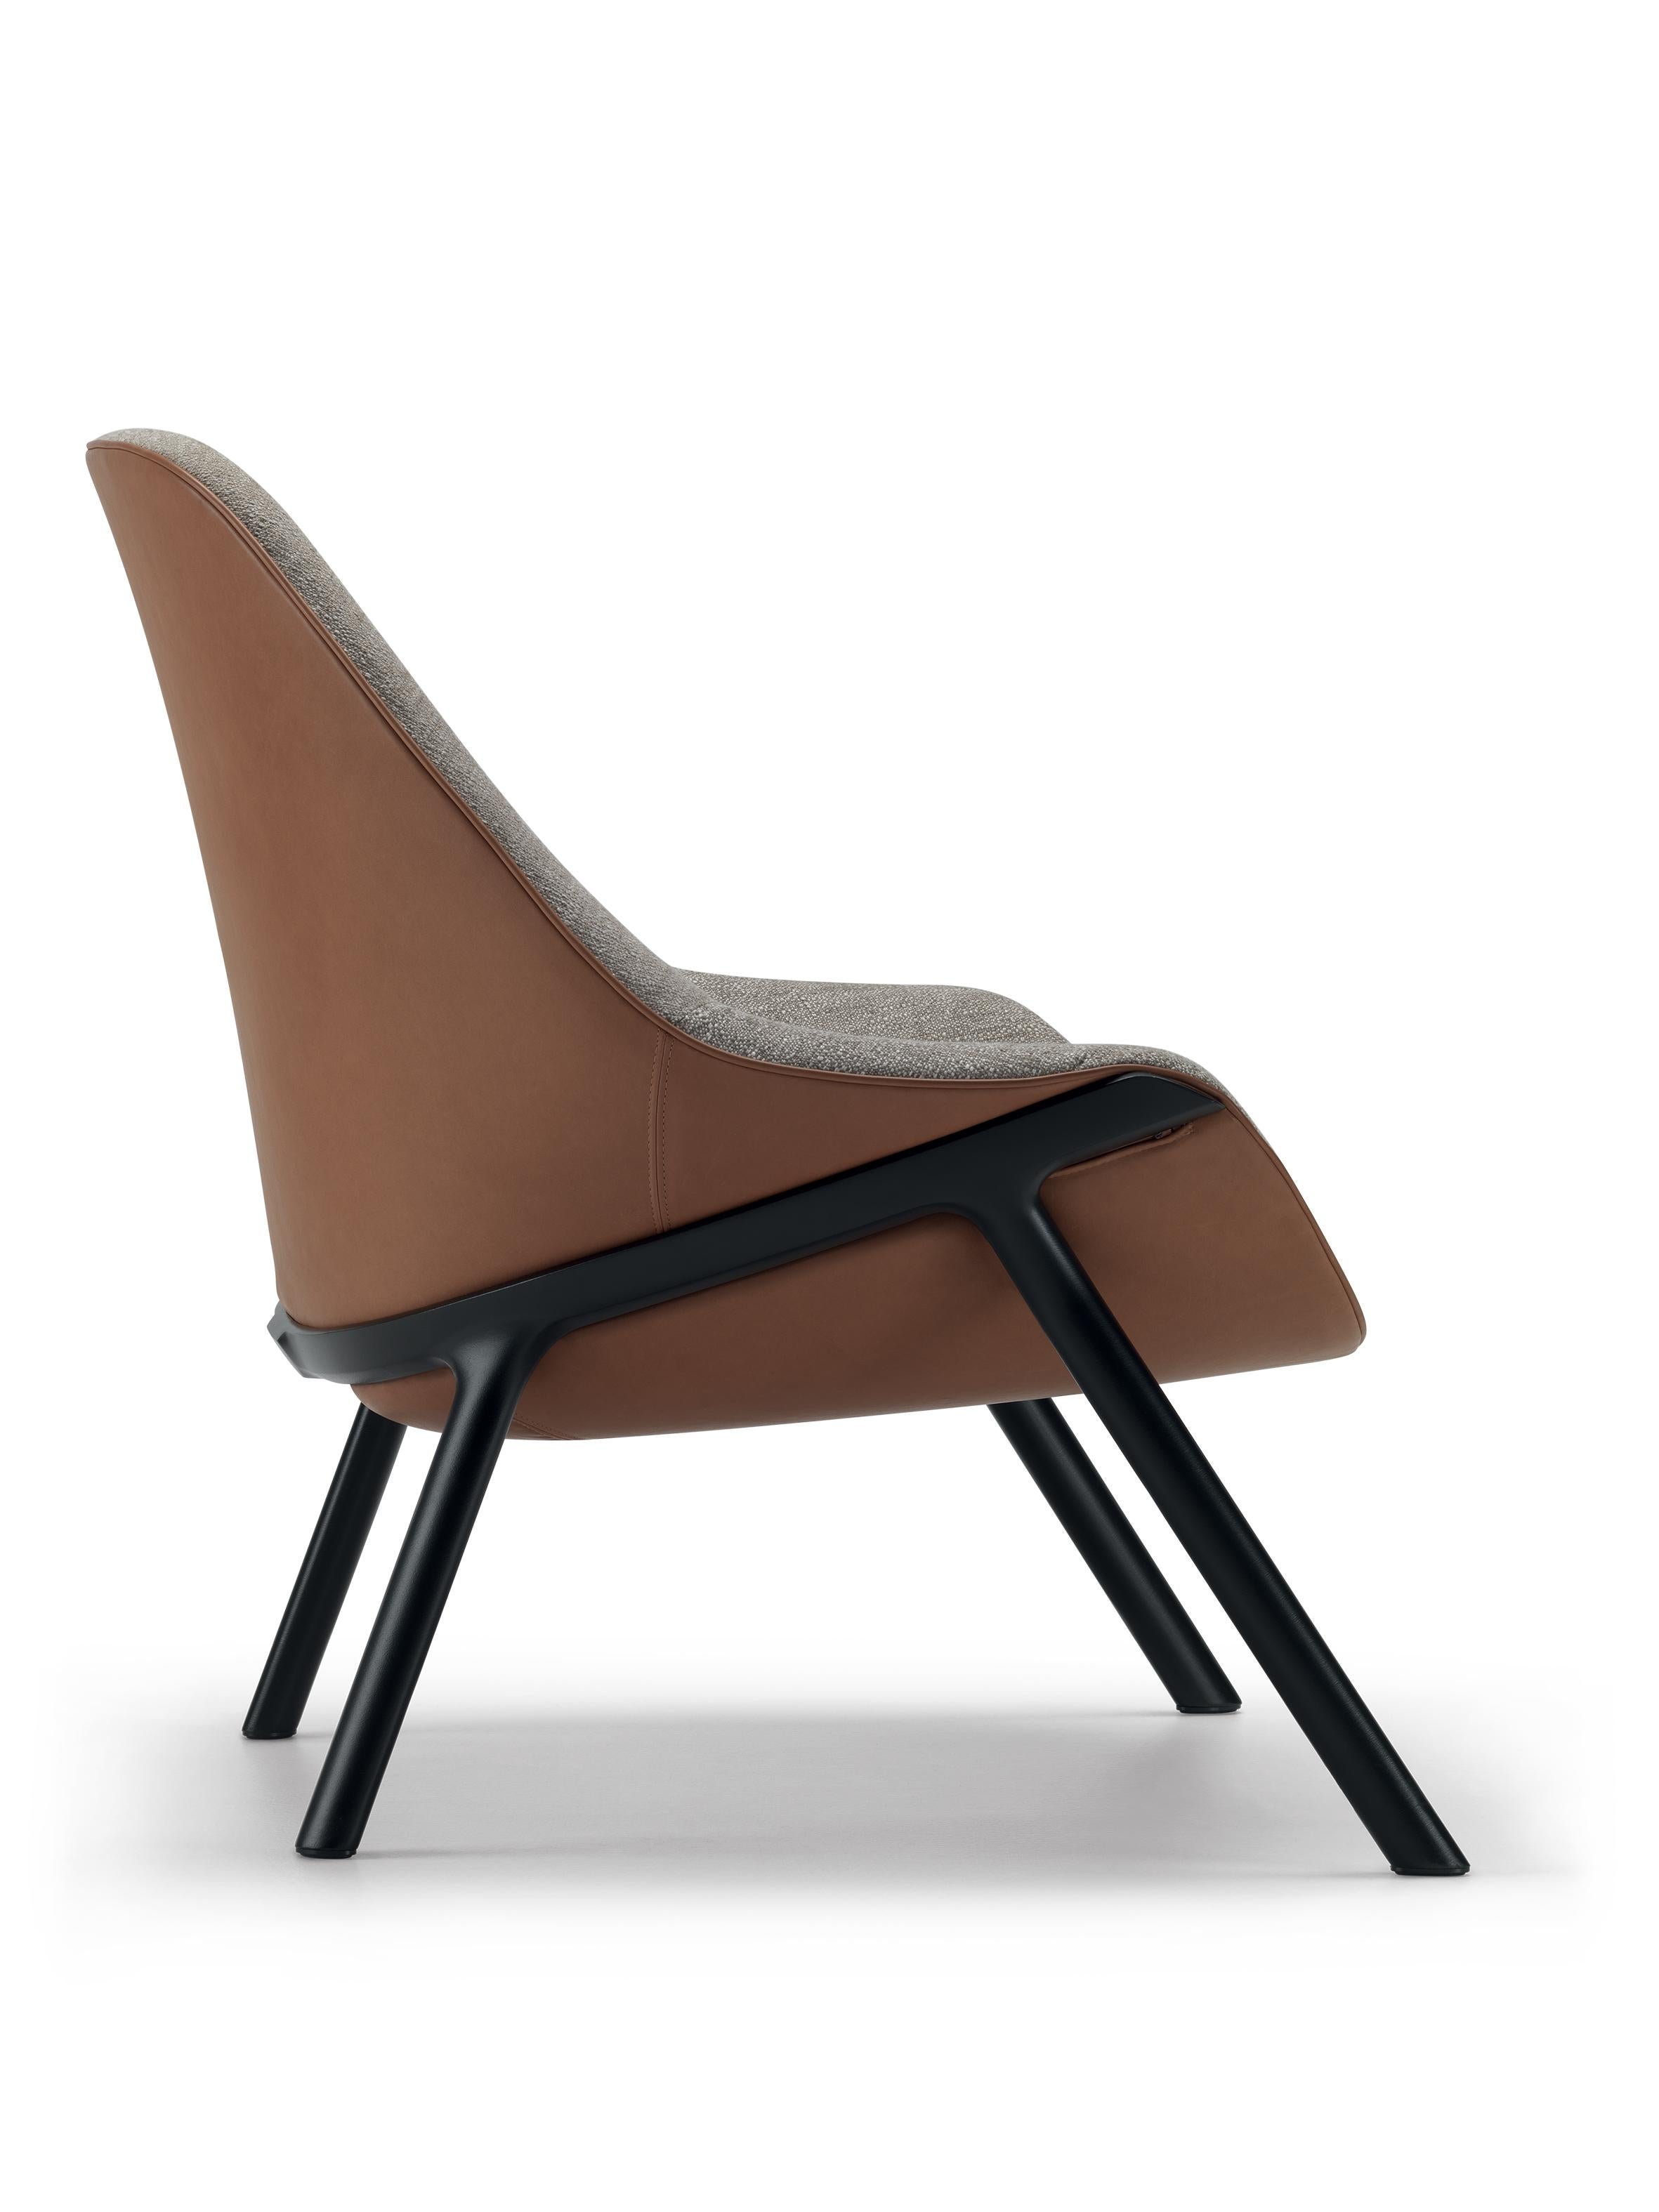 Alias 038 Gran Kobi Essentiel Armchair with Brown/Grey Seat and Lacquered Frame by Patrick Norguet

Armchair with structure in lacquered aluminium. Cushion in expanded polyurethane with cover in fabric or leather.Cover is not removable.It is